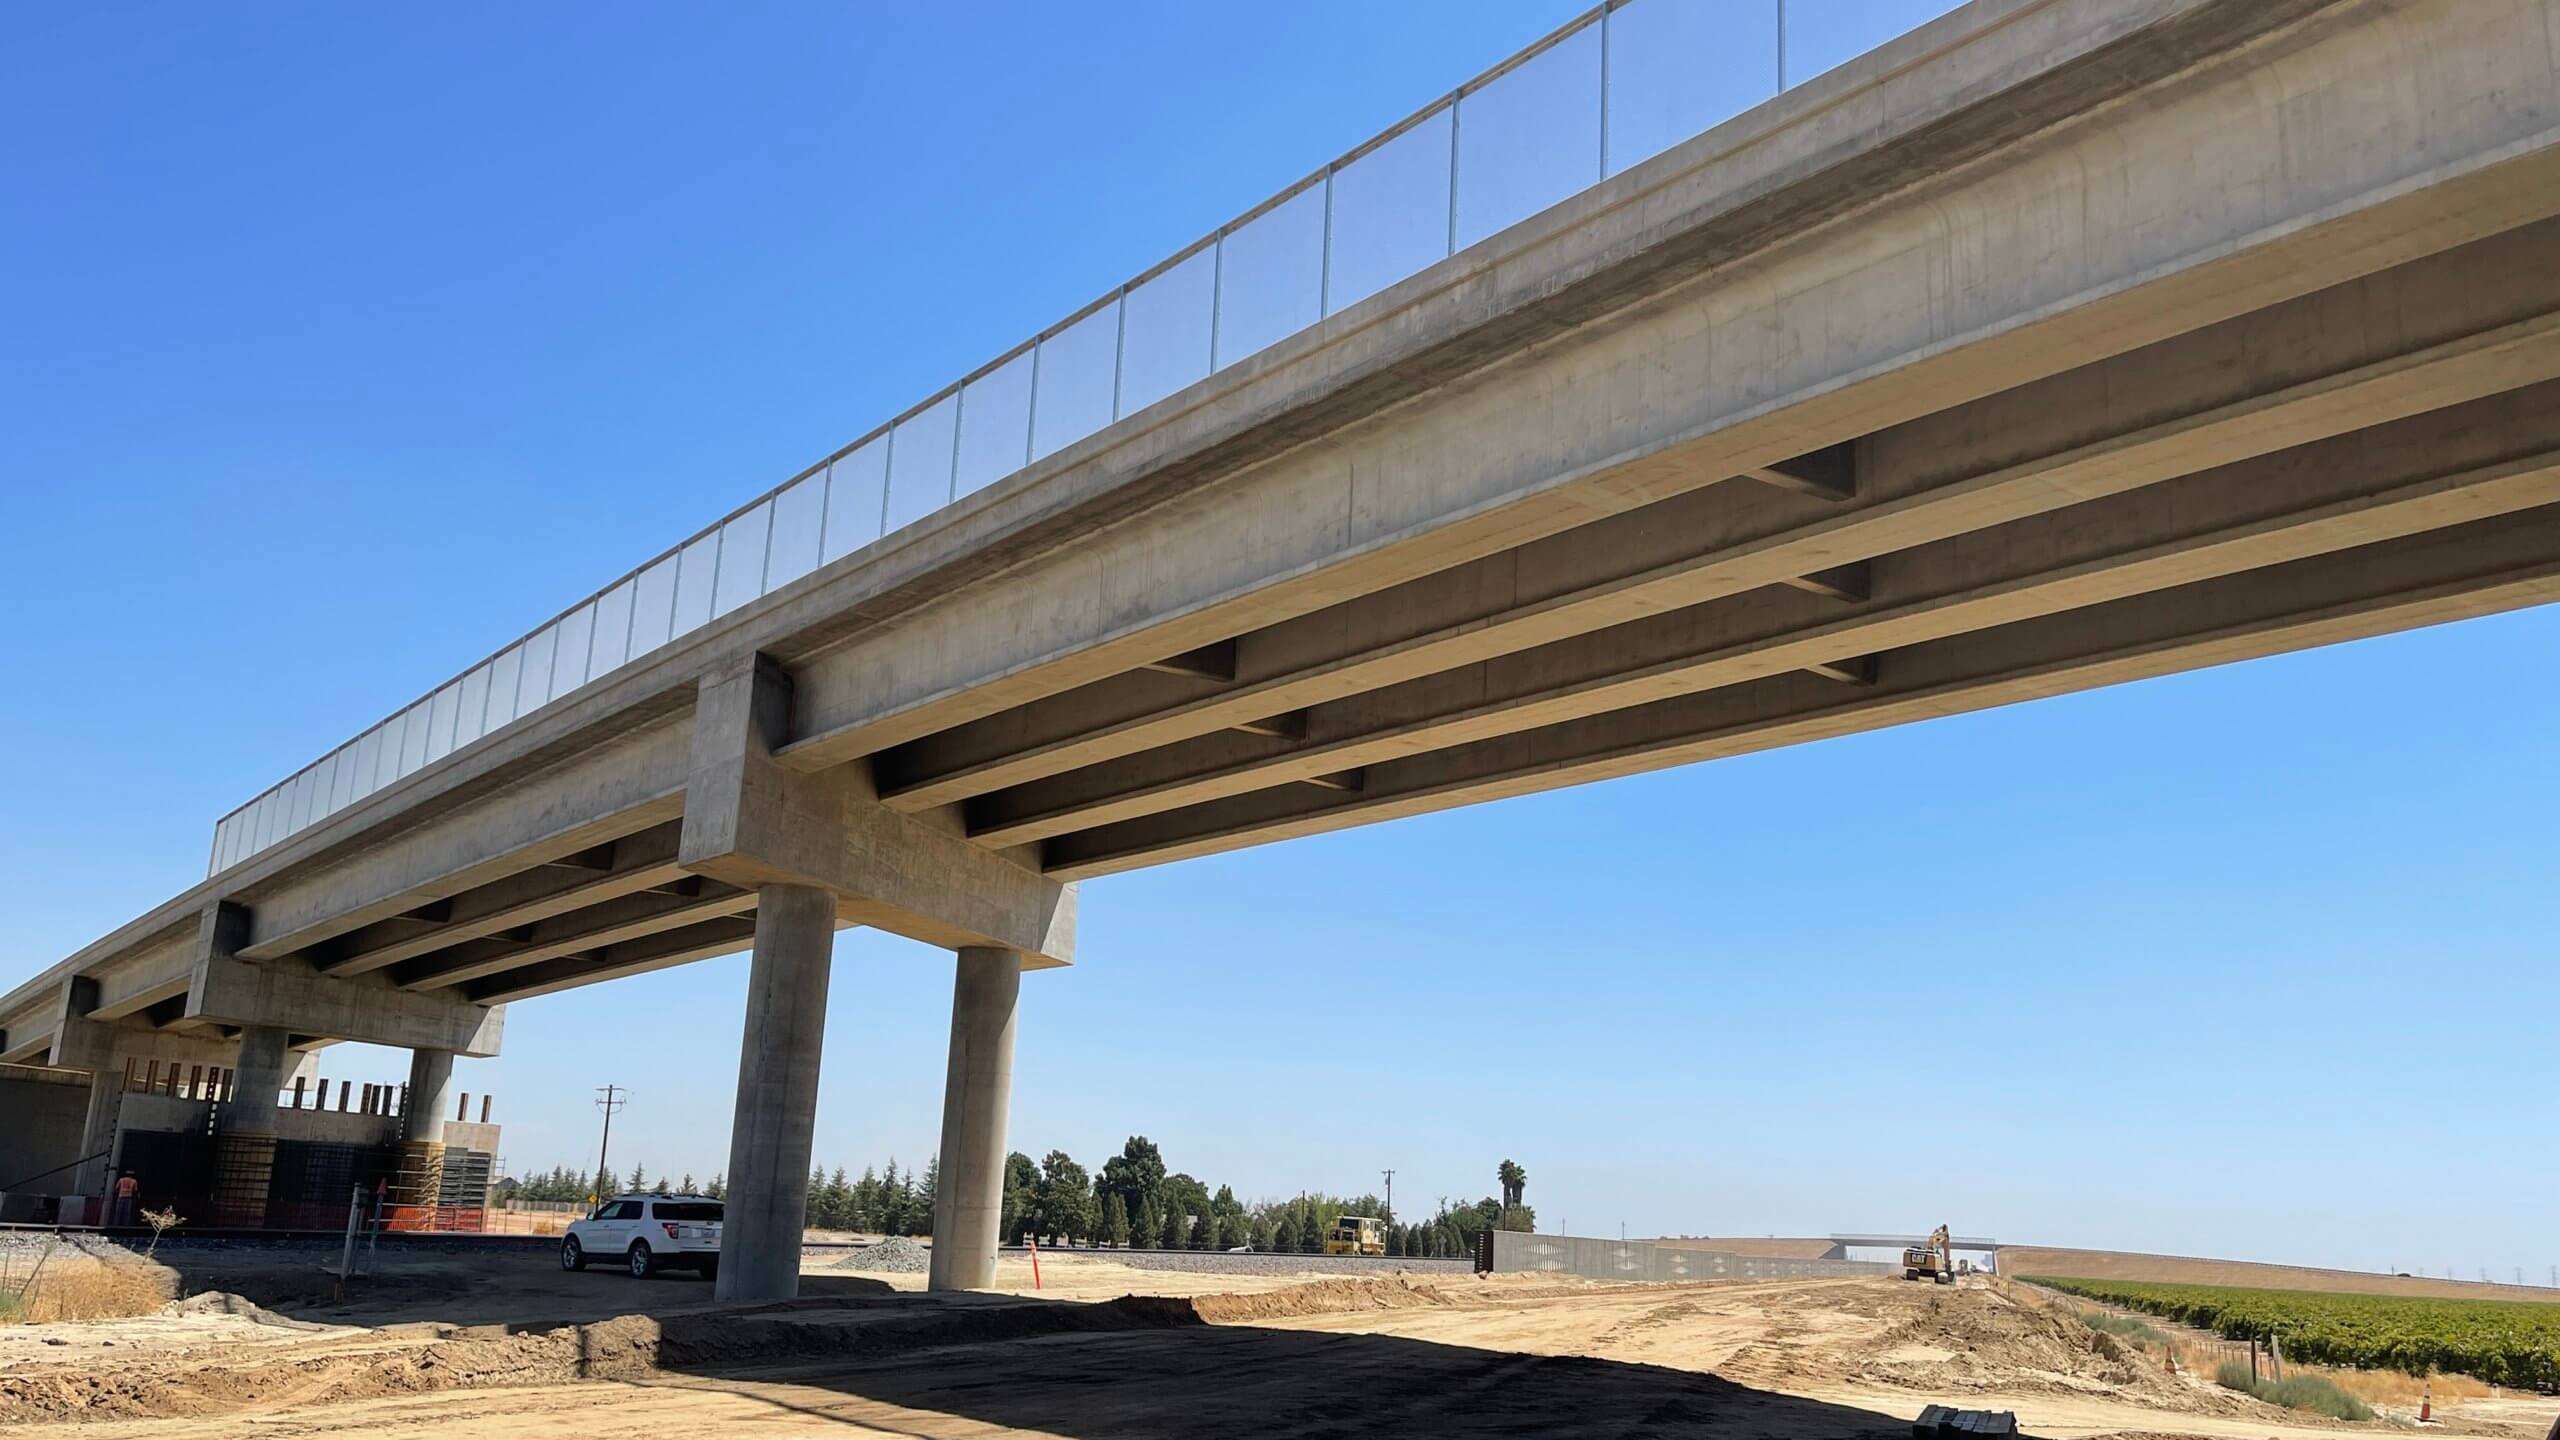 Underneath the newly compeleted and opened Avenue 15 1/2 grade separation, in the right of way where tracks will be laid. Another grade separation is visible on the horizon. Bright blue sky.